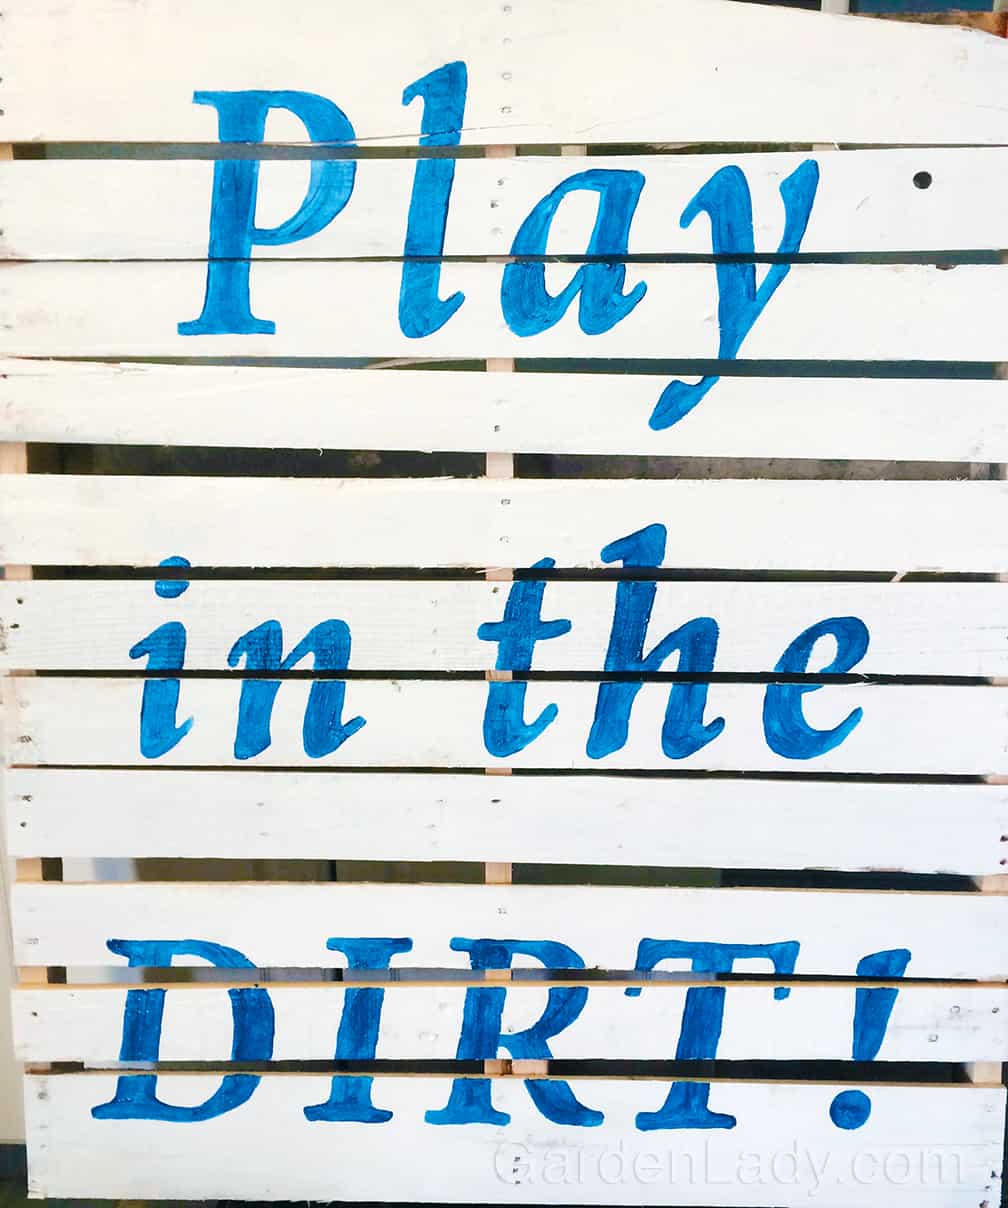 Play ball and play in the dirt. Just get out there an PLAY.